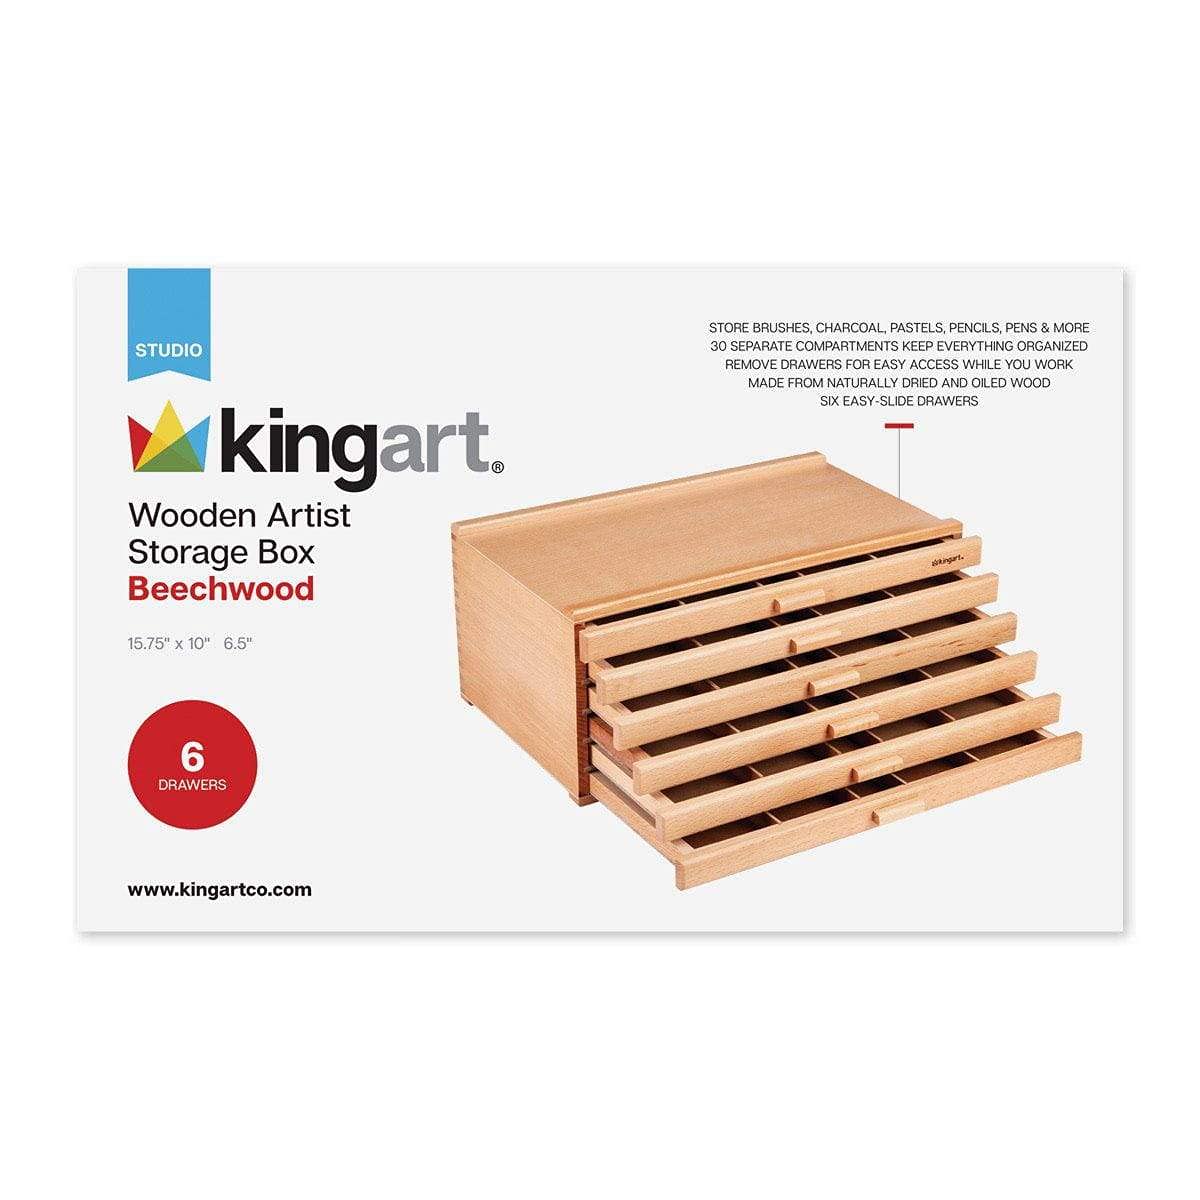 KINGART 723N Wood 6-Drawer Artist SUPPLY STORAGE BOX, 15-3/4” W x 10” D x 6-1/2” H, Natural Finish, Storage for Art Materials including Paint Tubes, Pastels, Pencils, Markers, Brushes and more